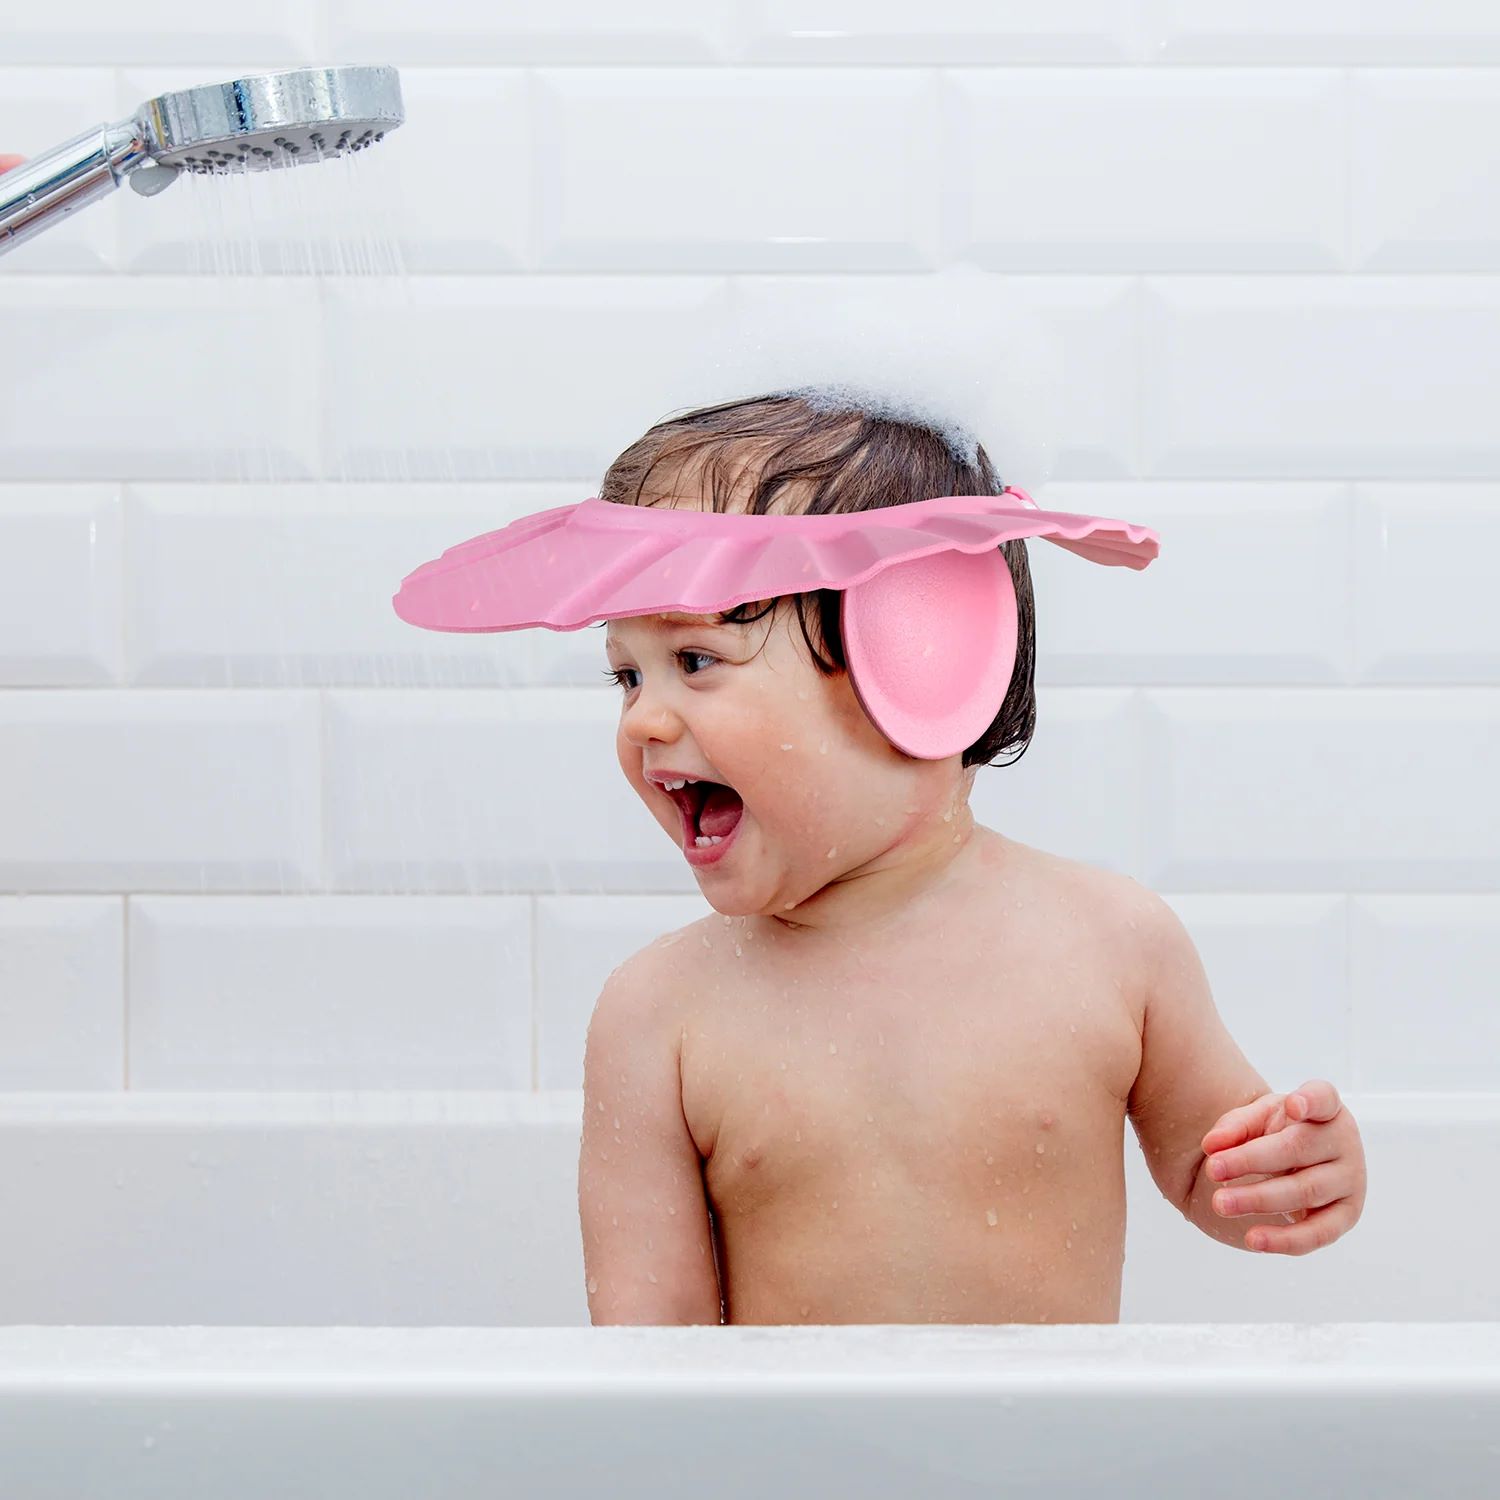 Review: Adjustable Baby Bath Hat – A Must-Have for Bath Time